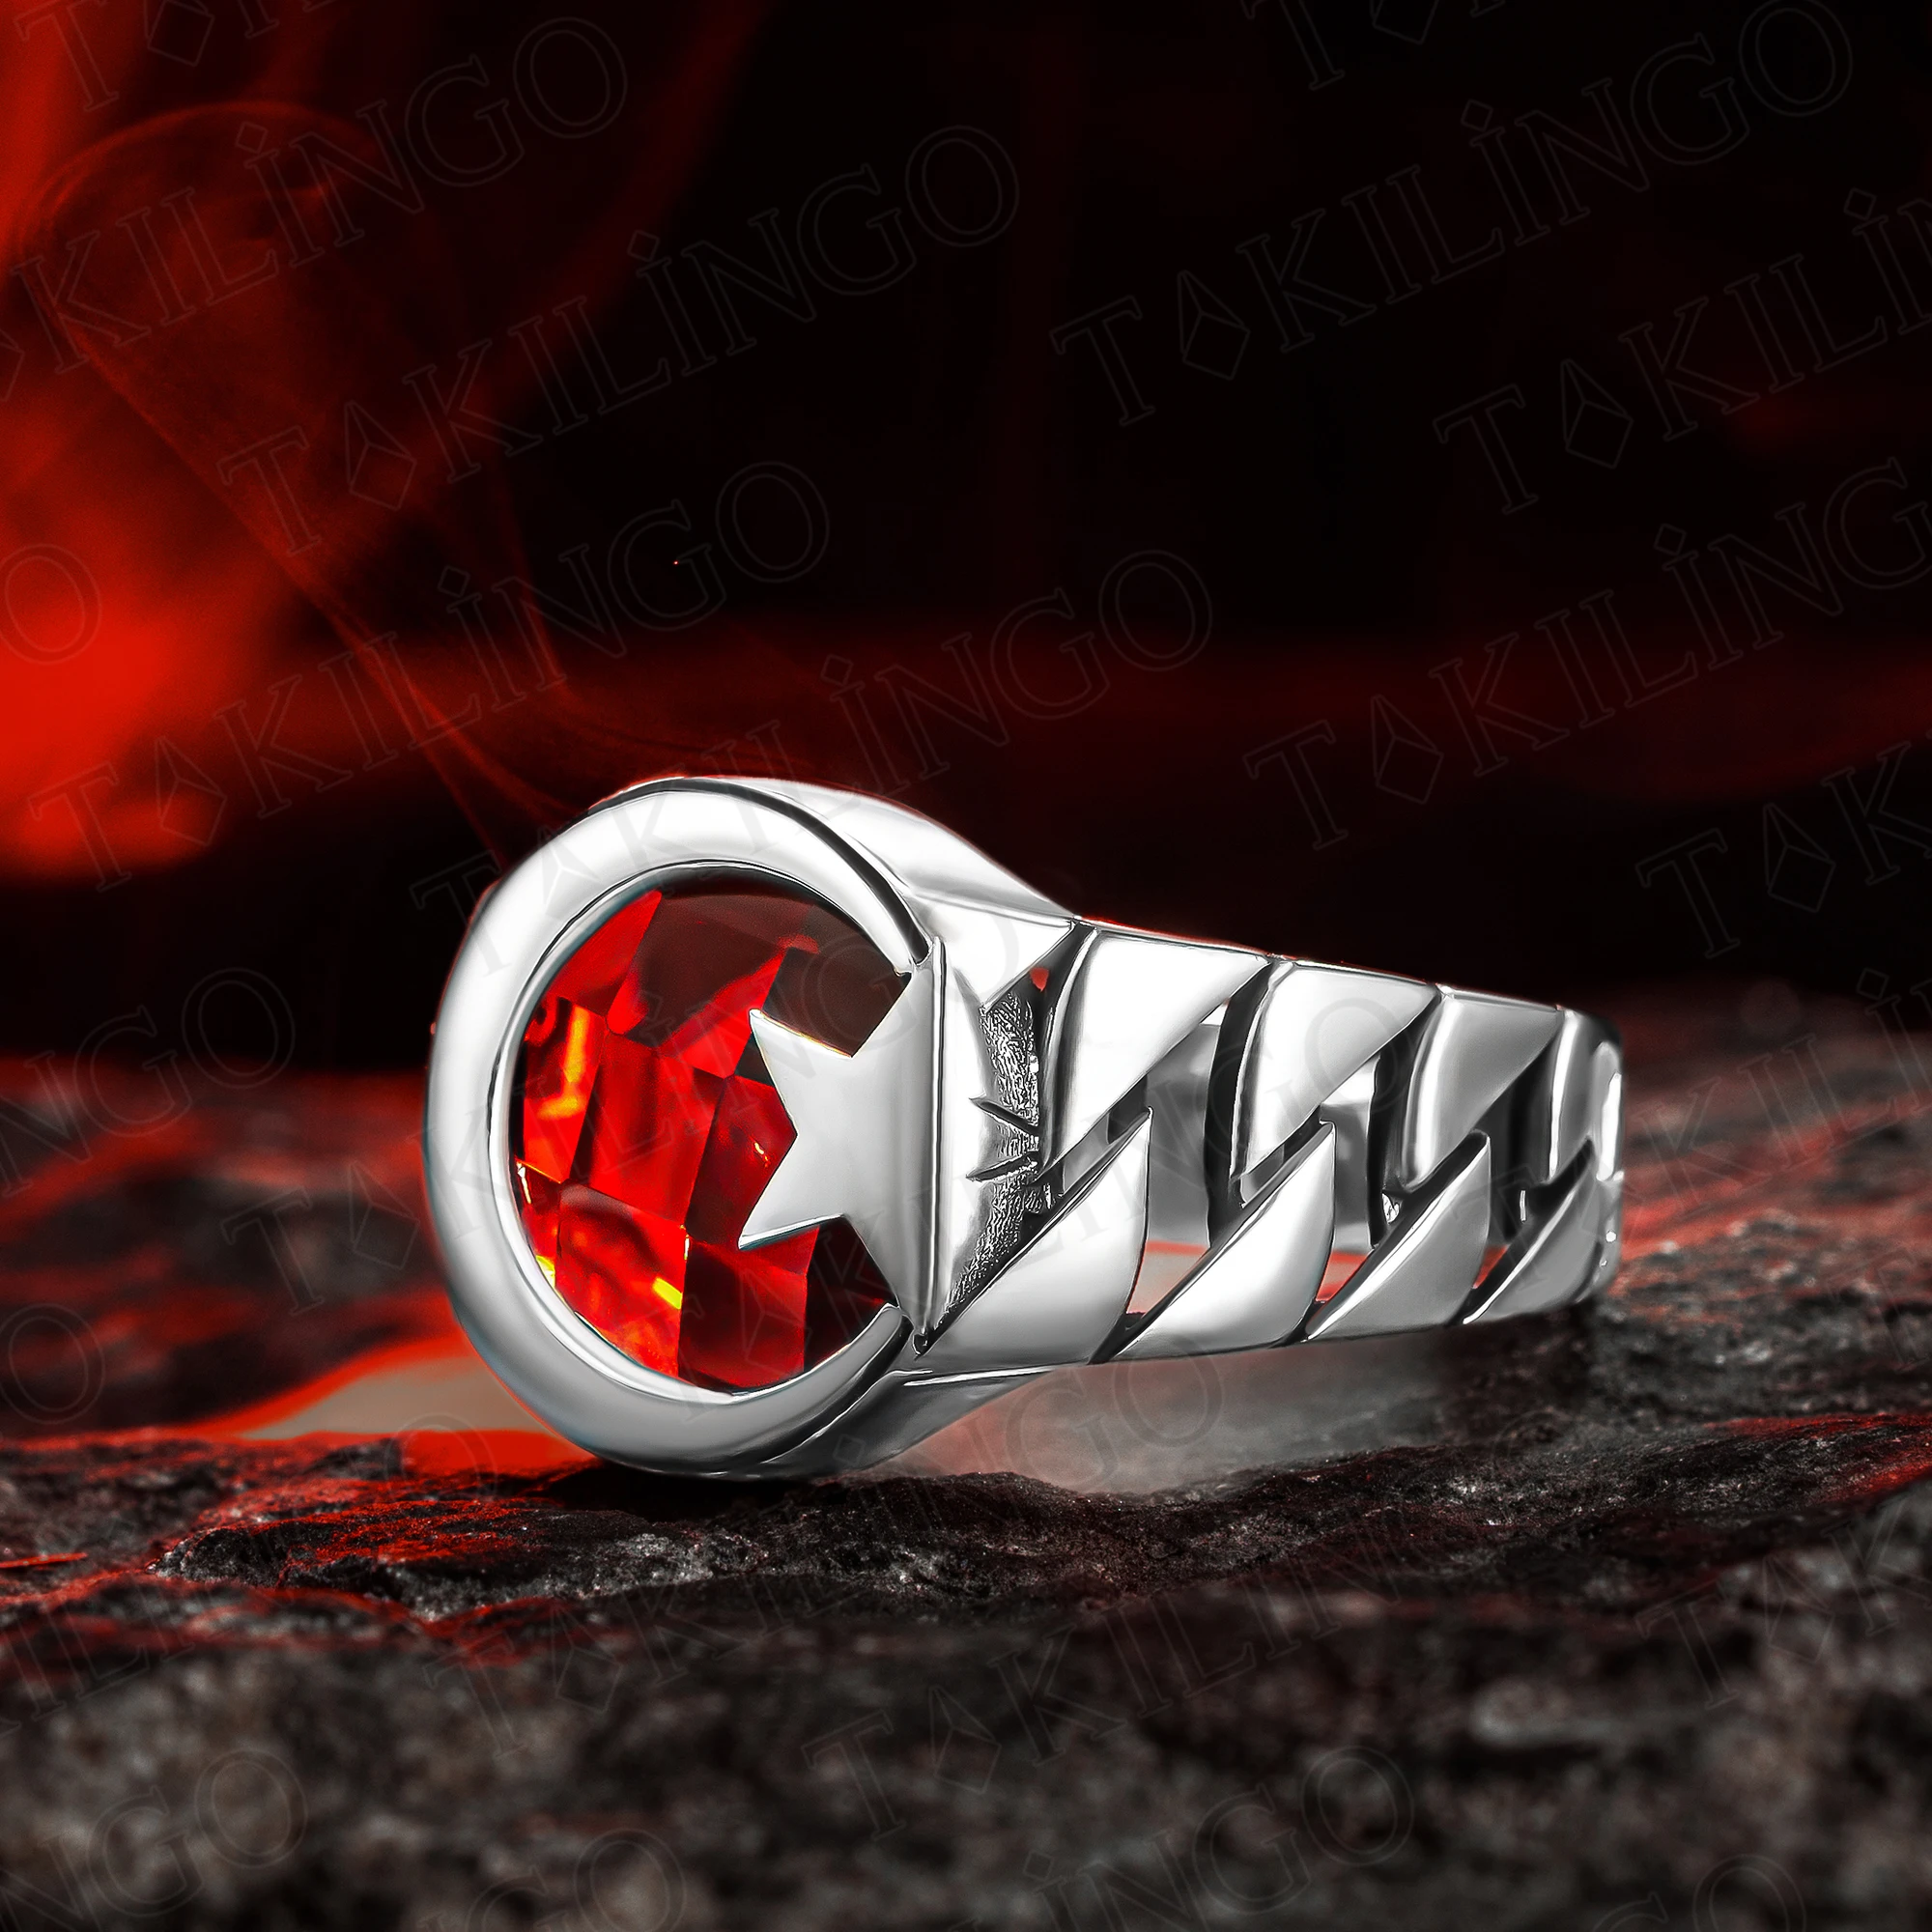 

Crescent Moon Ring Men, 925 Sterling Silver Ring With Red Zircon Stone For Men, Moon Ring Men, Turkish Ring, Star Crescent Ring